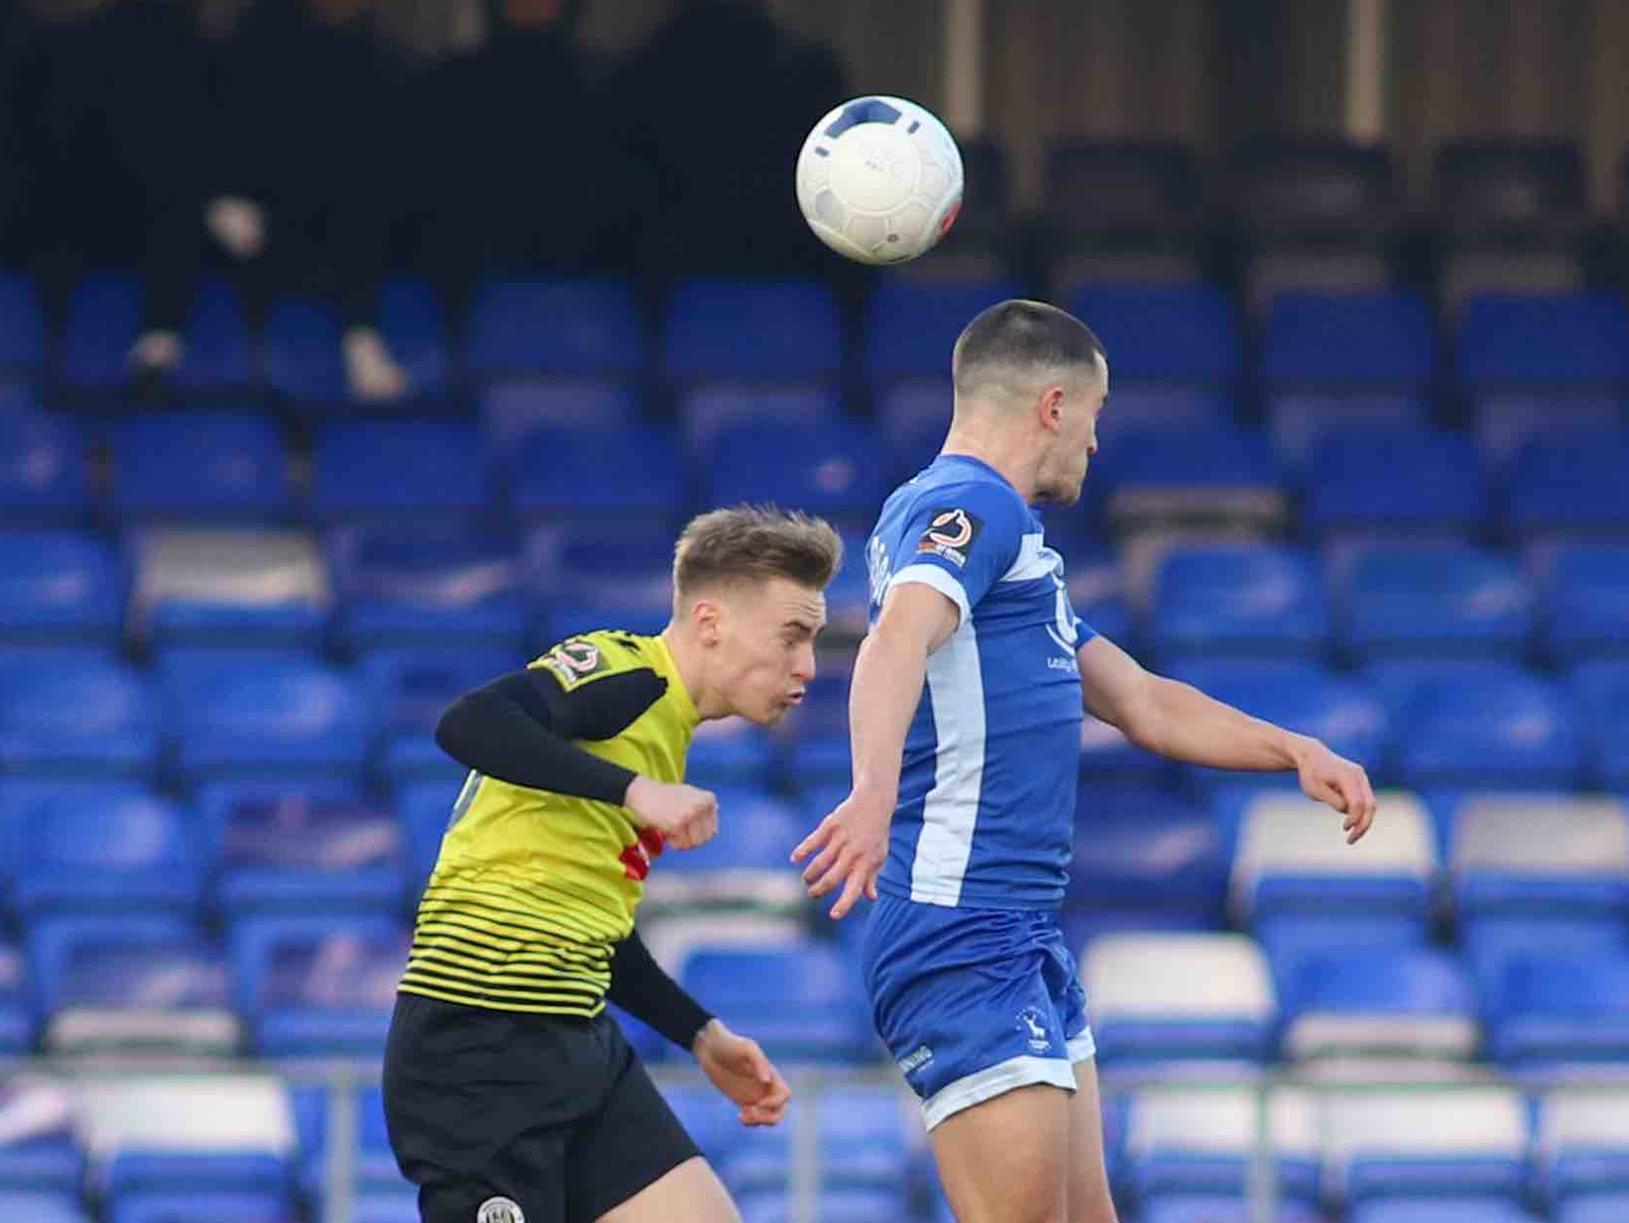 Alex Bradley 8. Didn't look a natural in the right-back position initially however he has really grown into the role. Defended well, was good in possession and had a big hand in Town's goal.